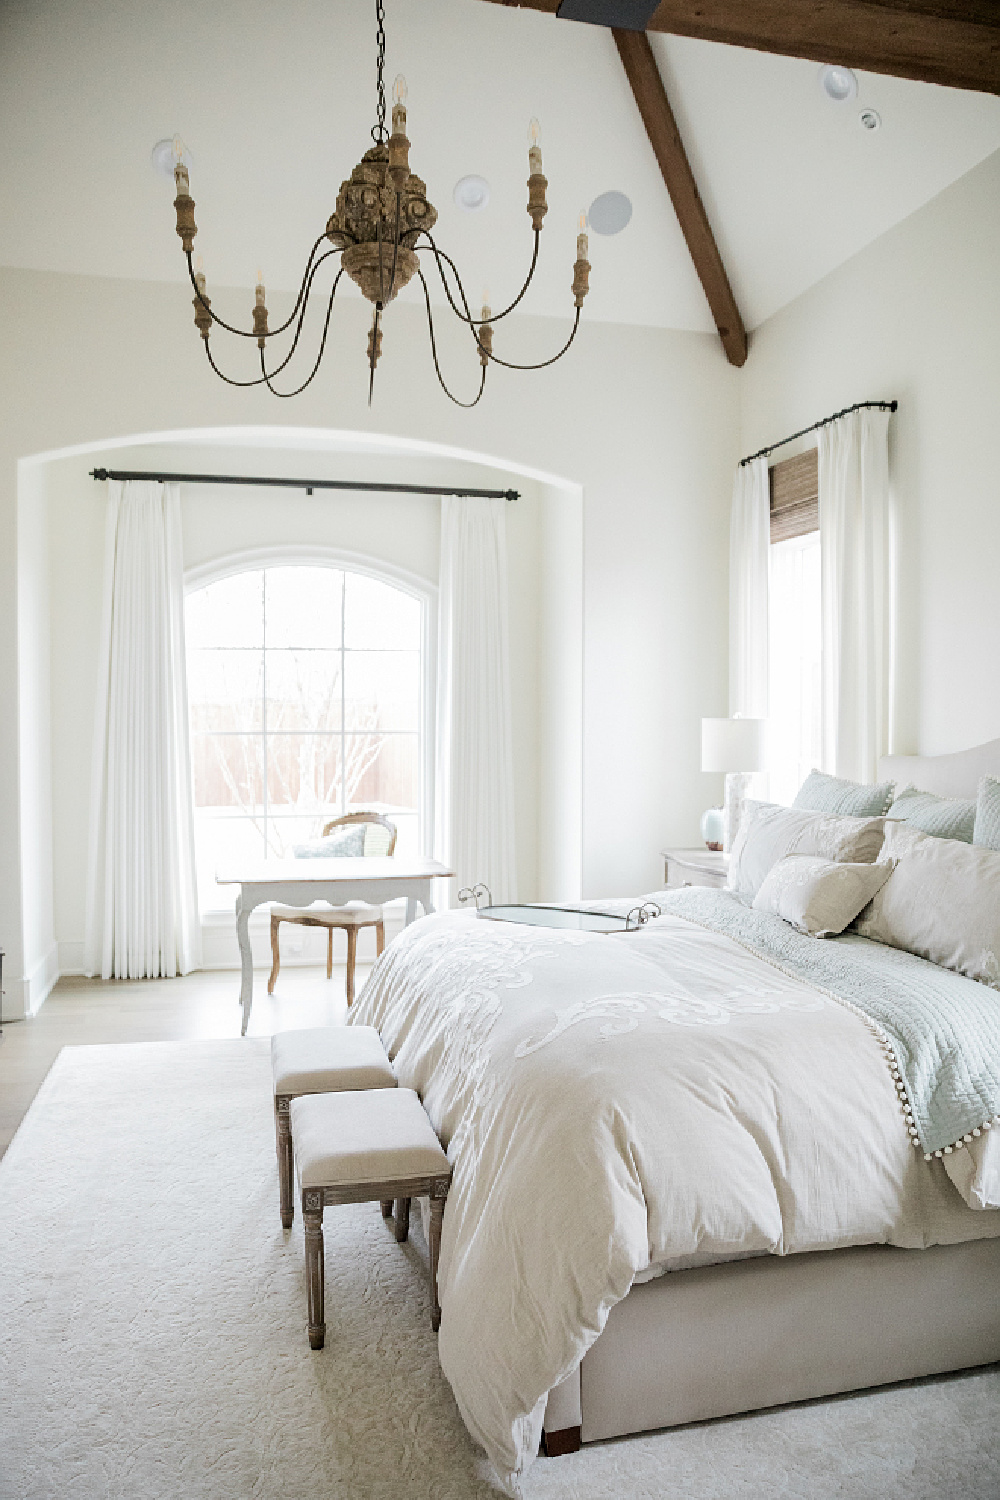 Airy, lofty, and elegant French country farmhouse bedroom with arches, desk, and bench. Brit Jones Design.